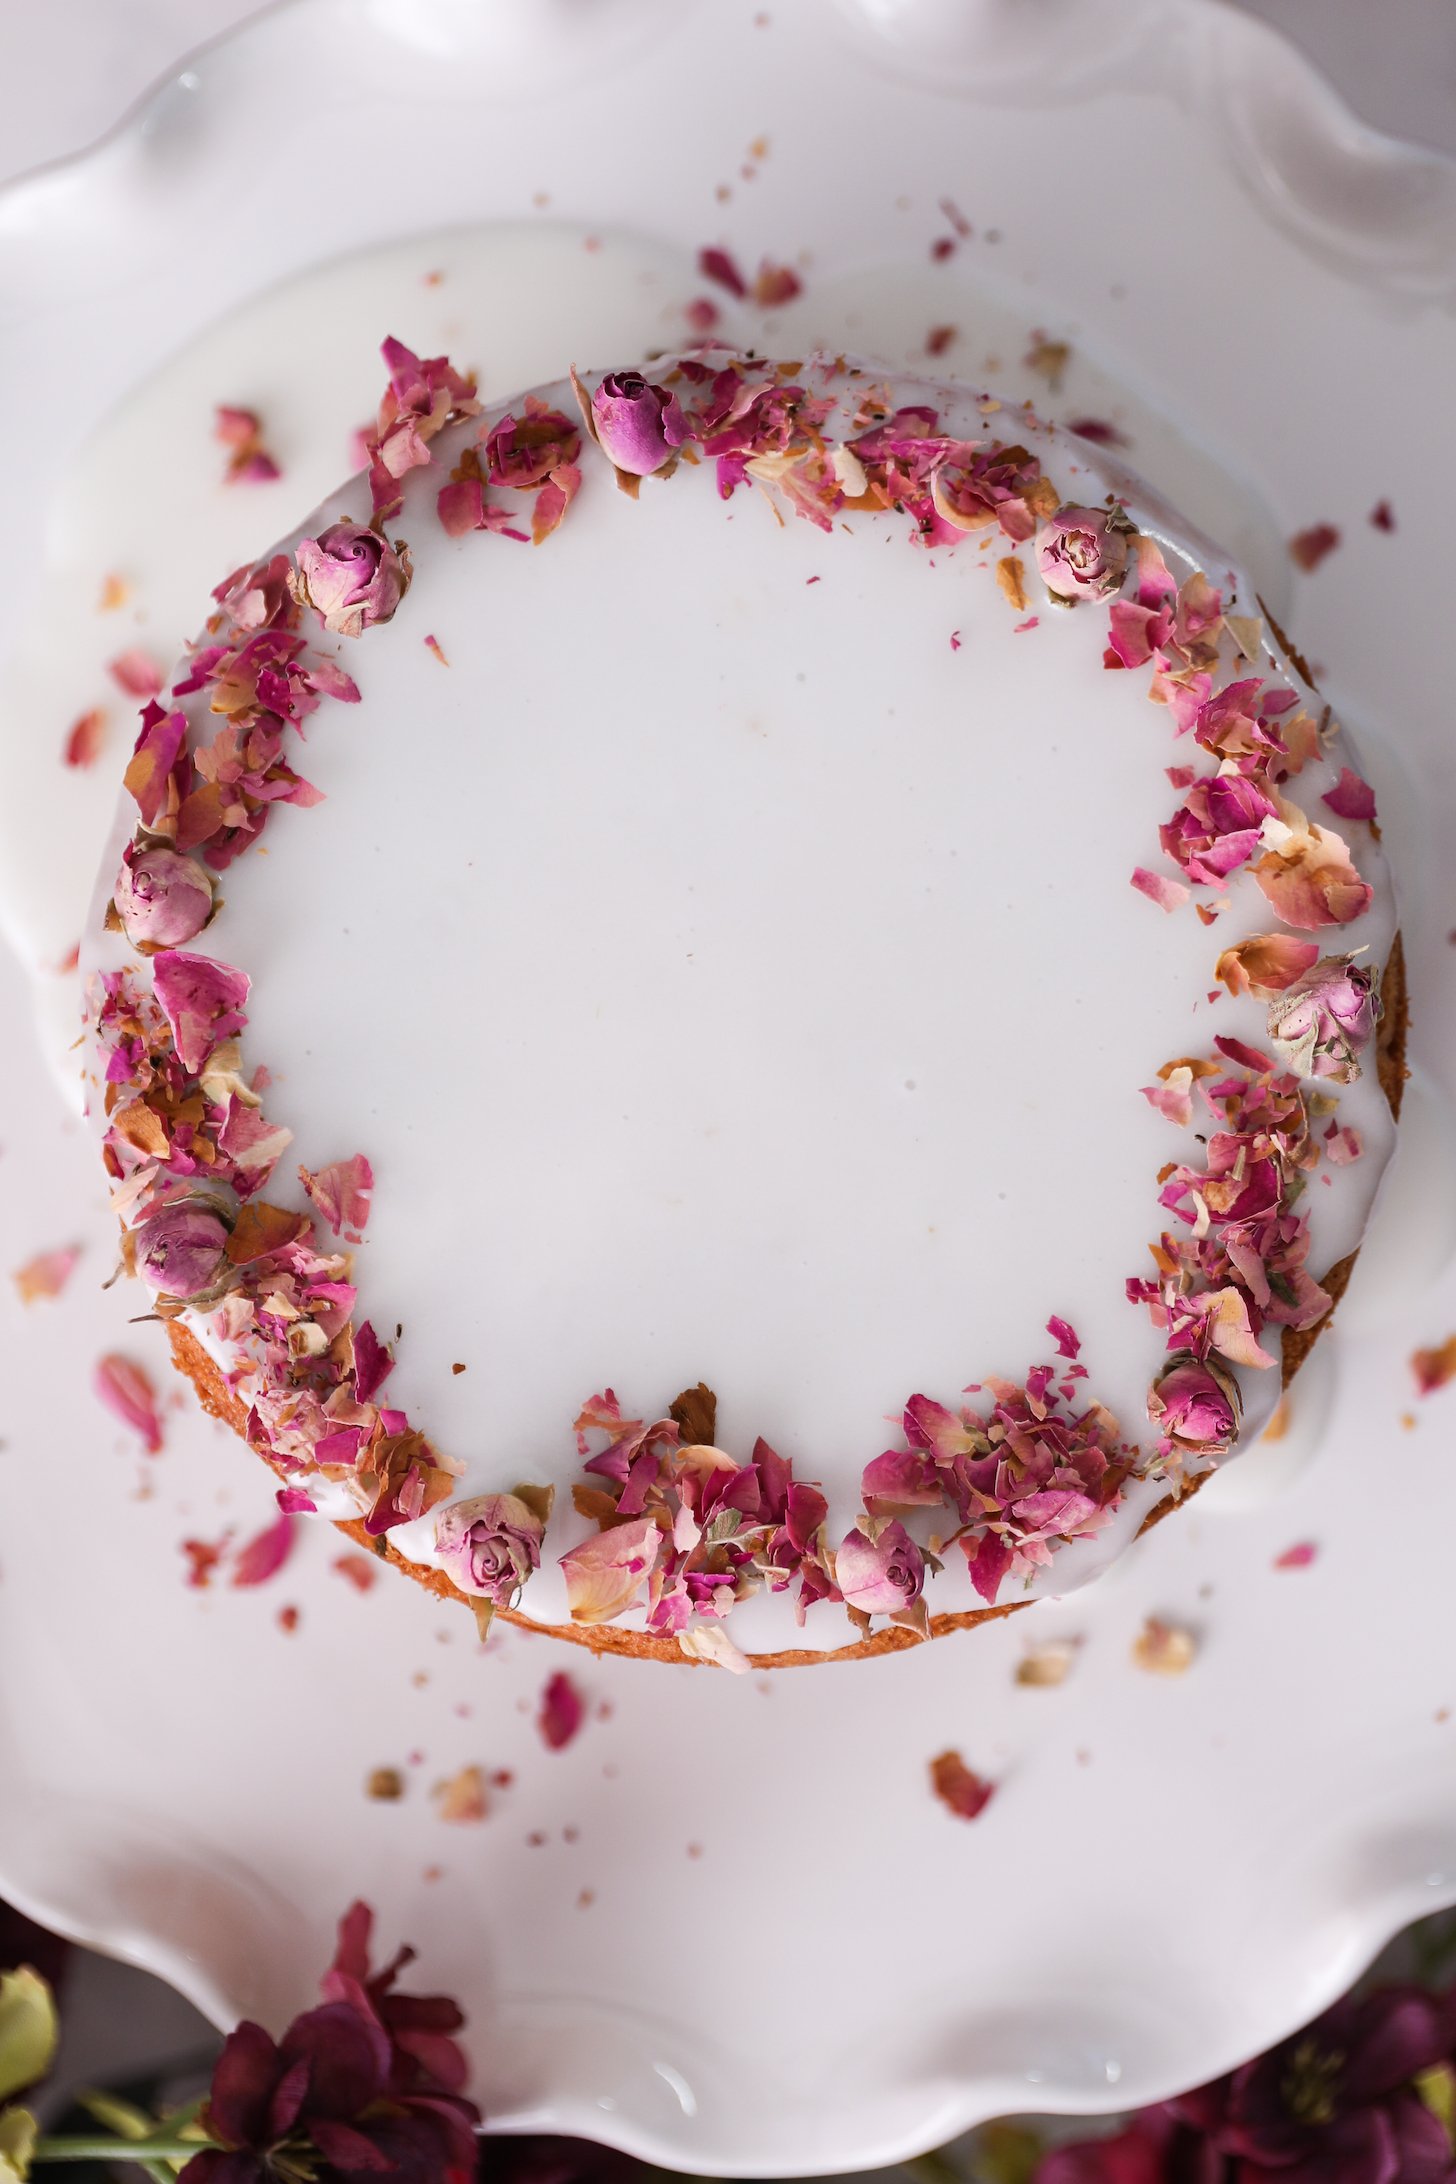 A white cake stand holds a round cake topped with smooth white icing with a boarder of red roses.